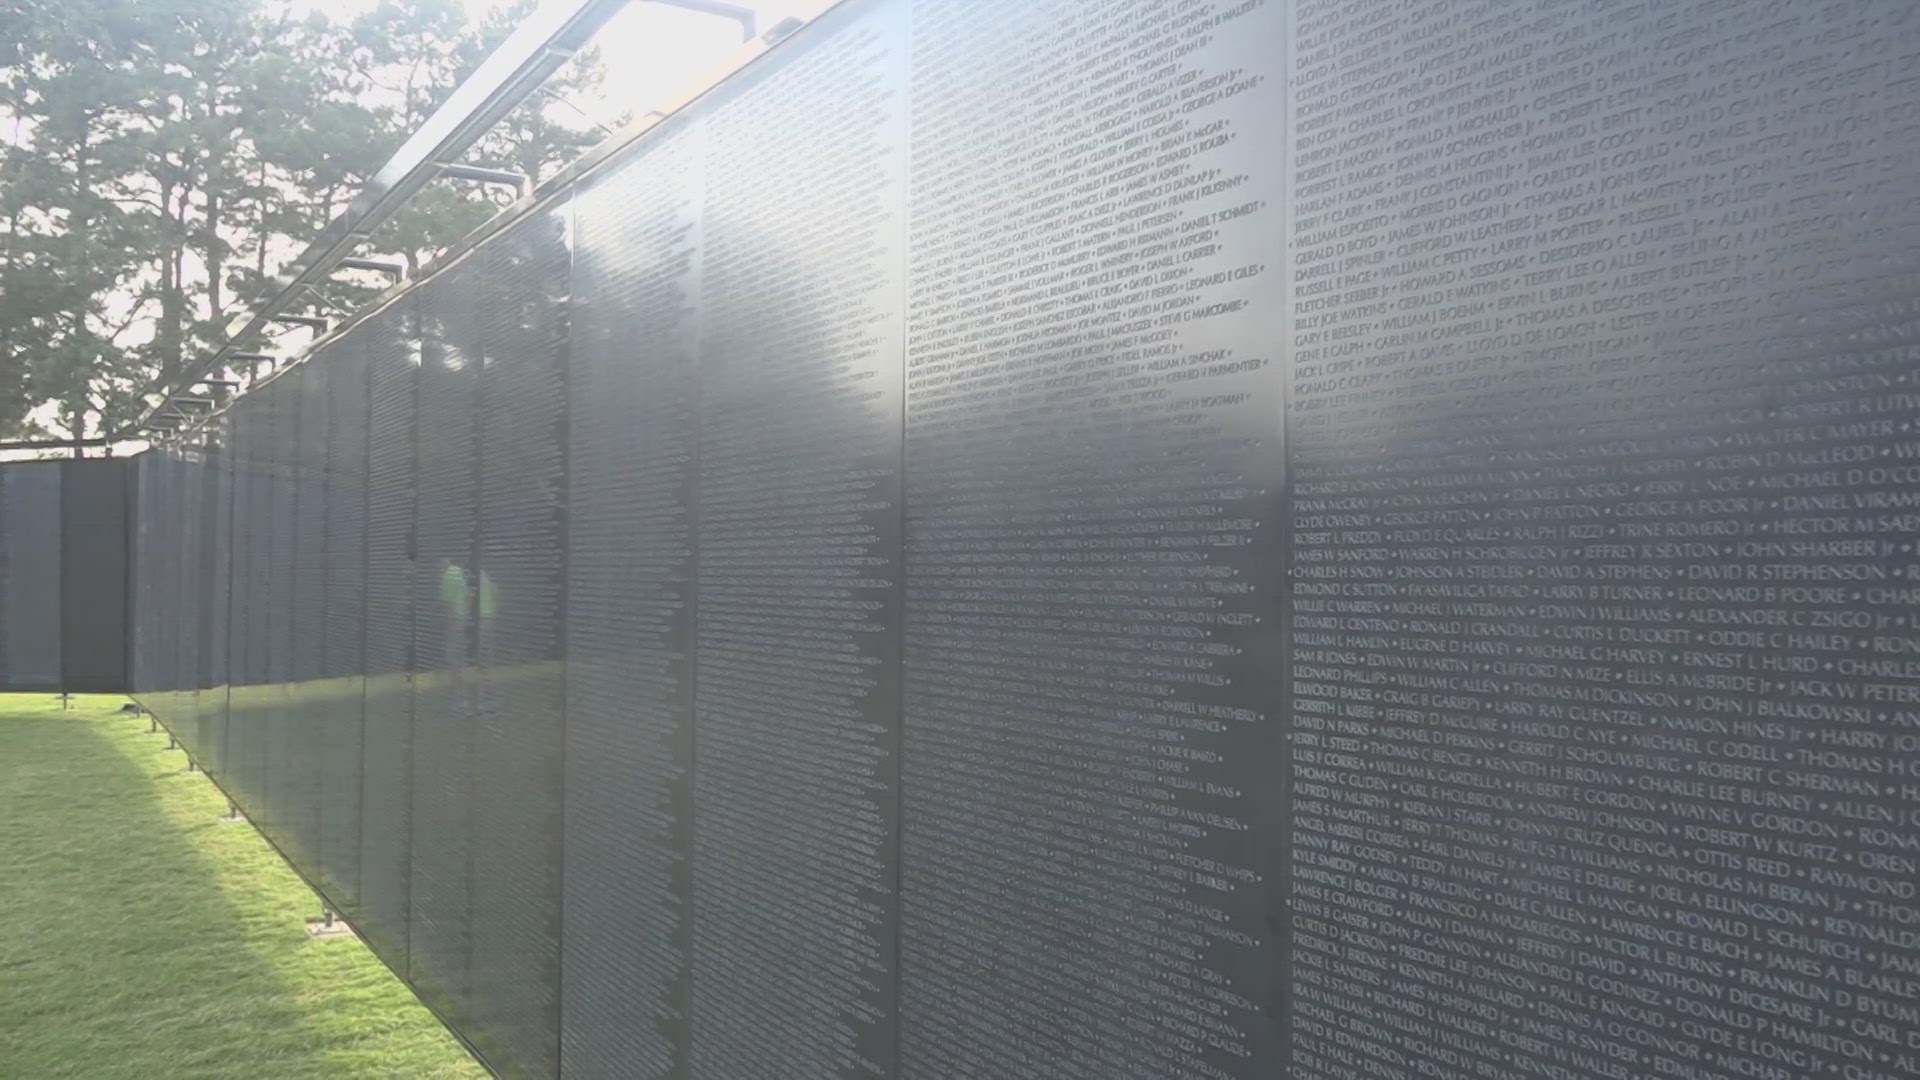 The Wall That Heals will stay up through Sunday.